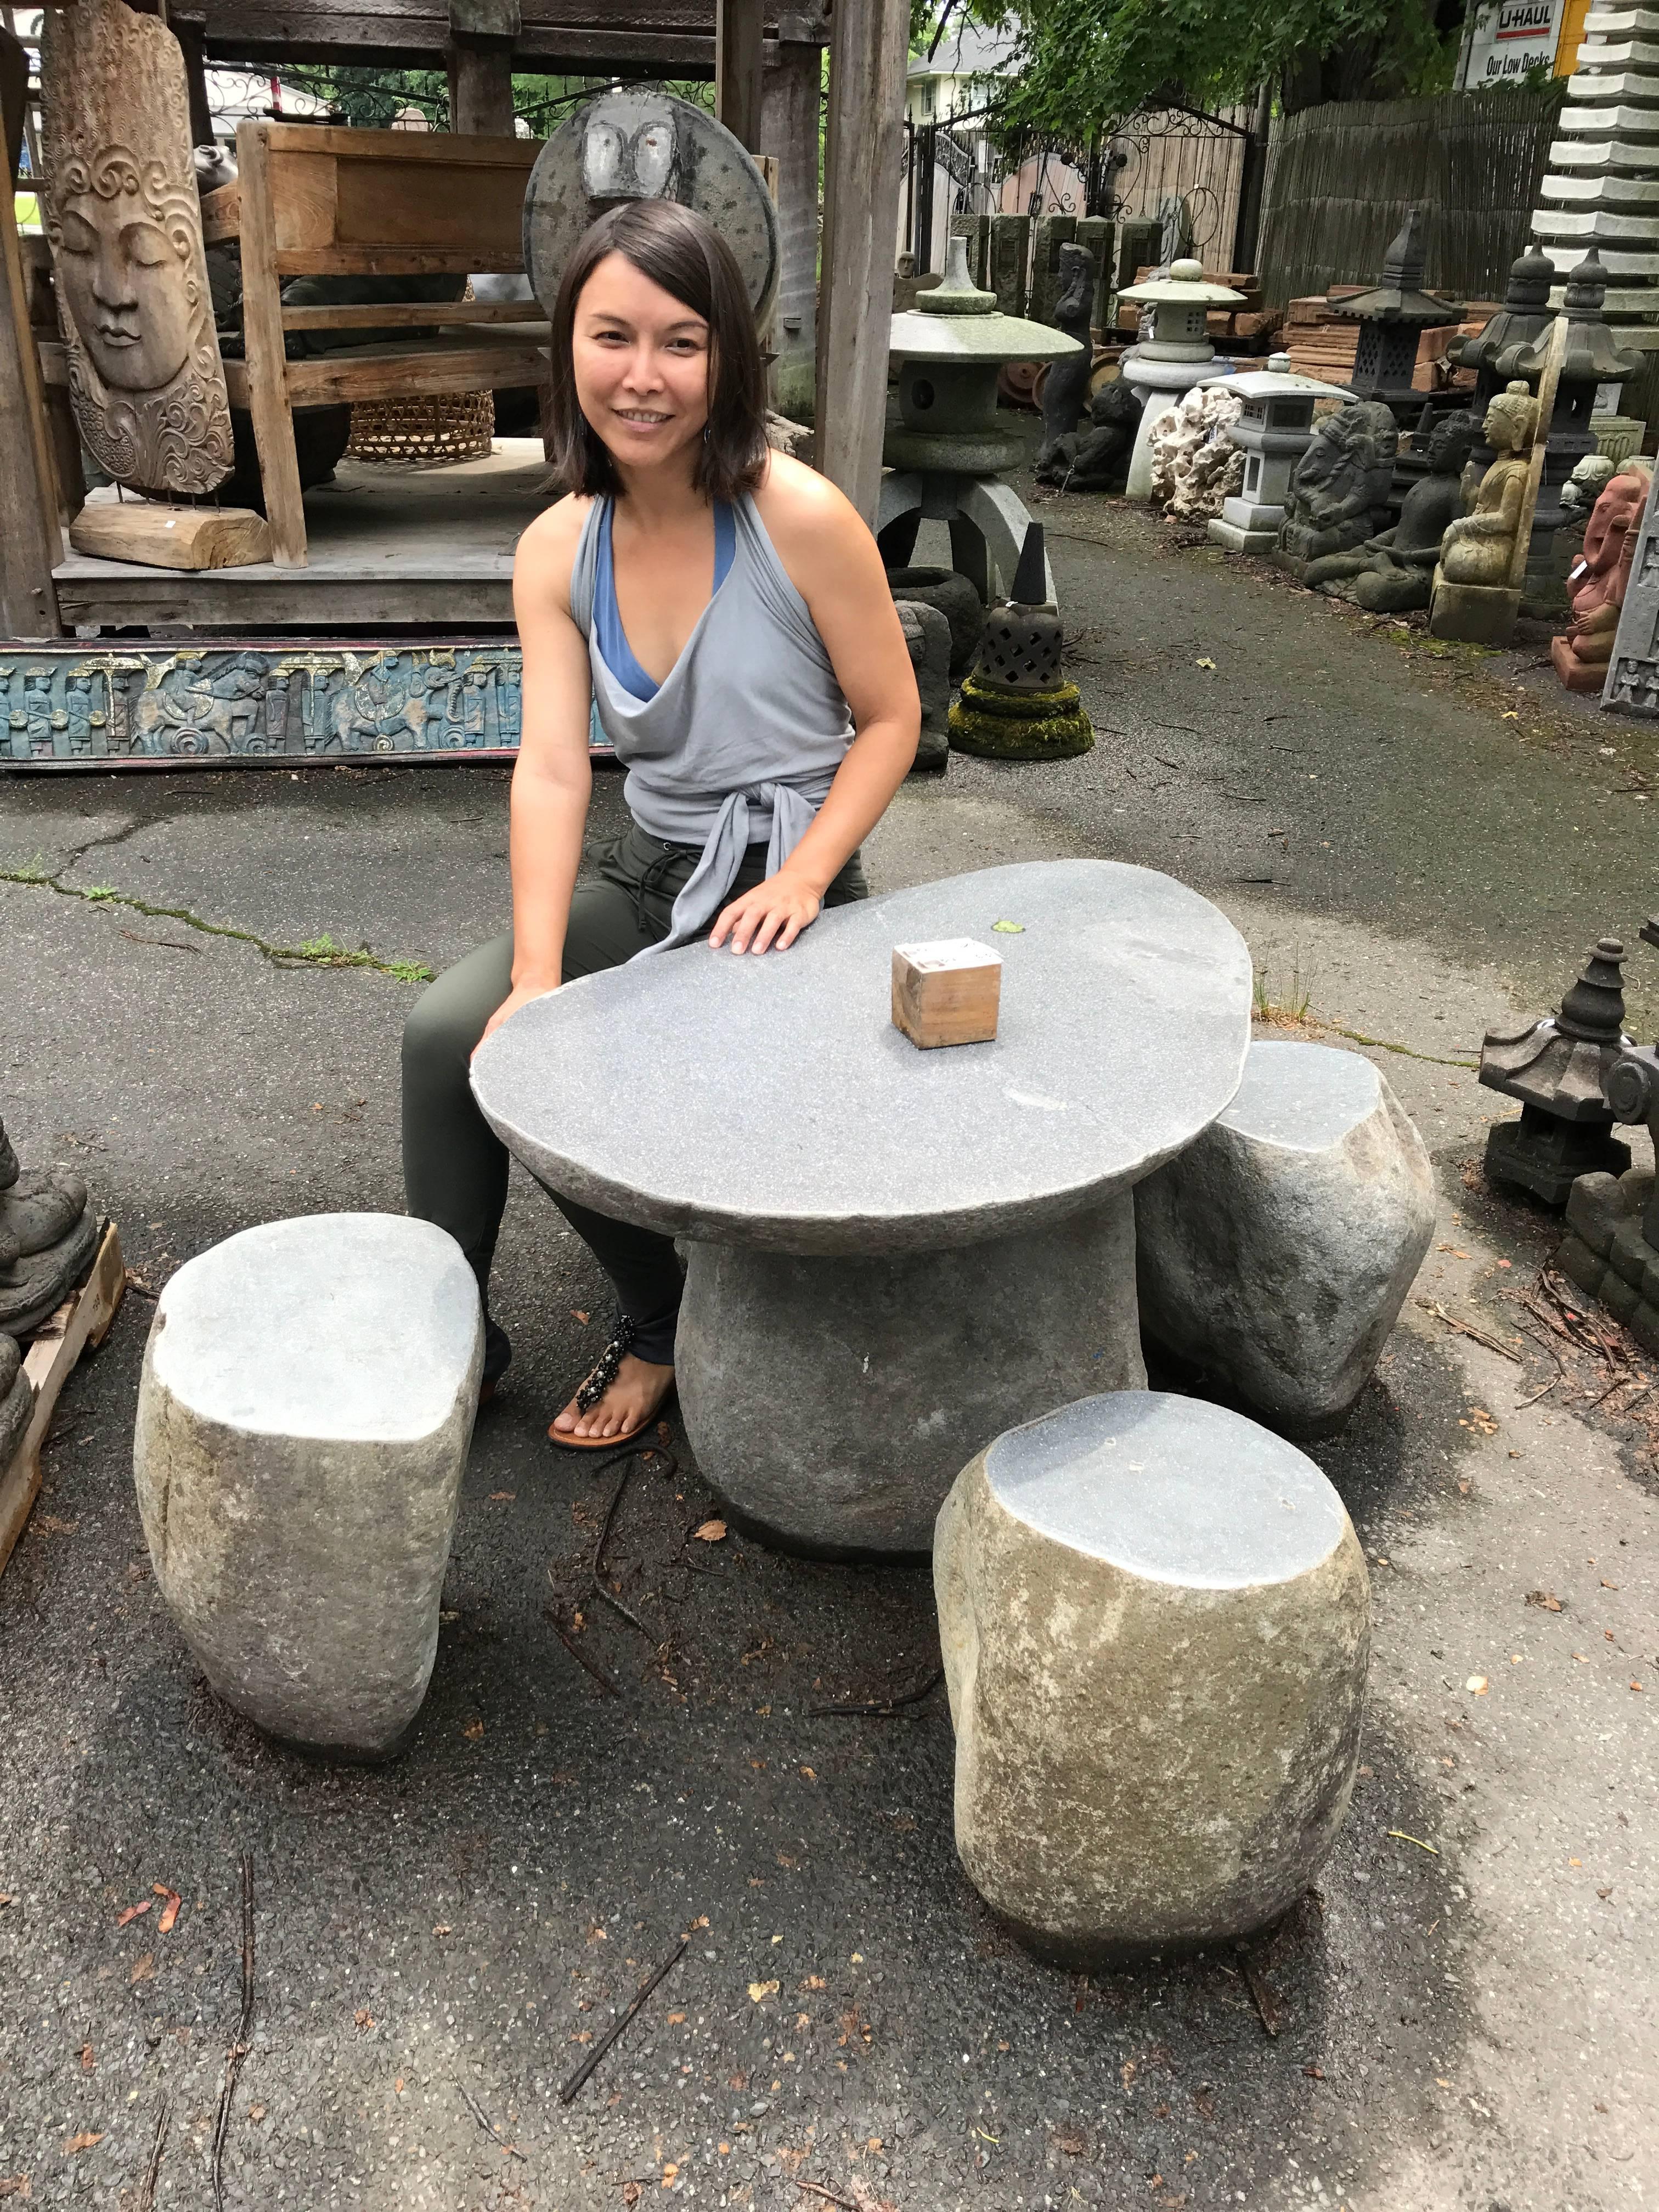 Two left.

Now taking last orders for April delivery. 

Here's one of the most beautiful and useful modern organic form stone table and stools we have ever found in our travels to the orient over the past years.

Their powerful yet simple designs